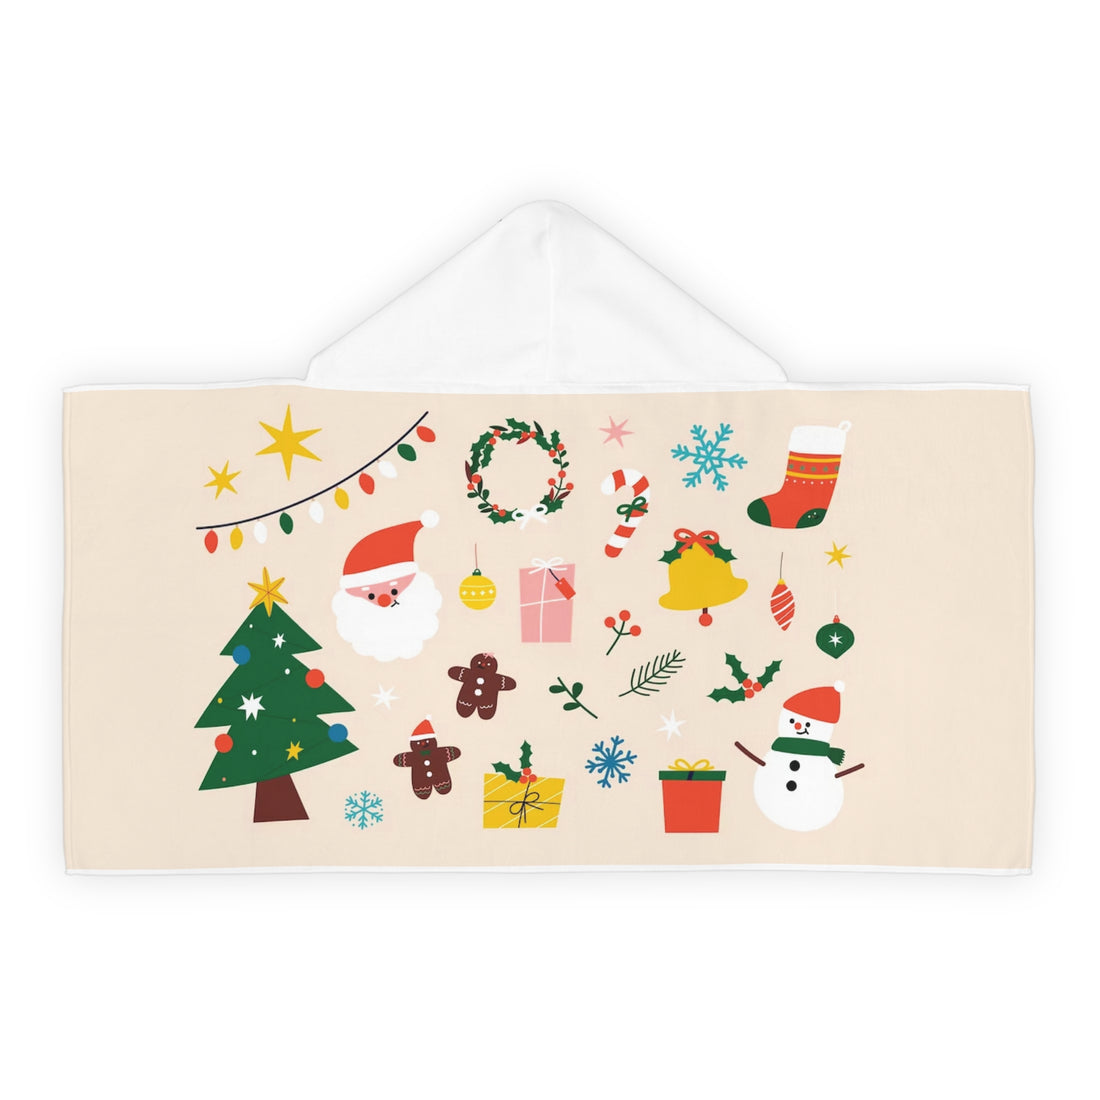 Youth Hooded Christmas Towel